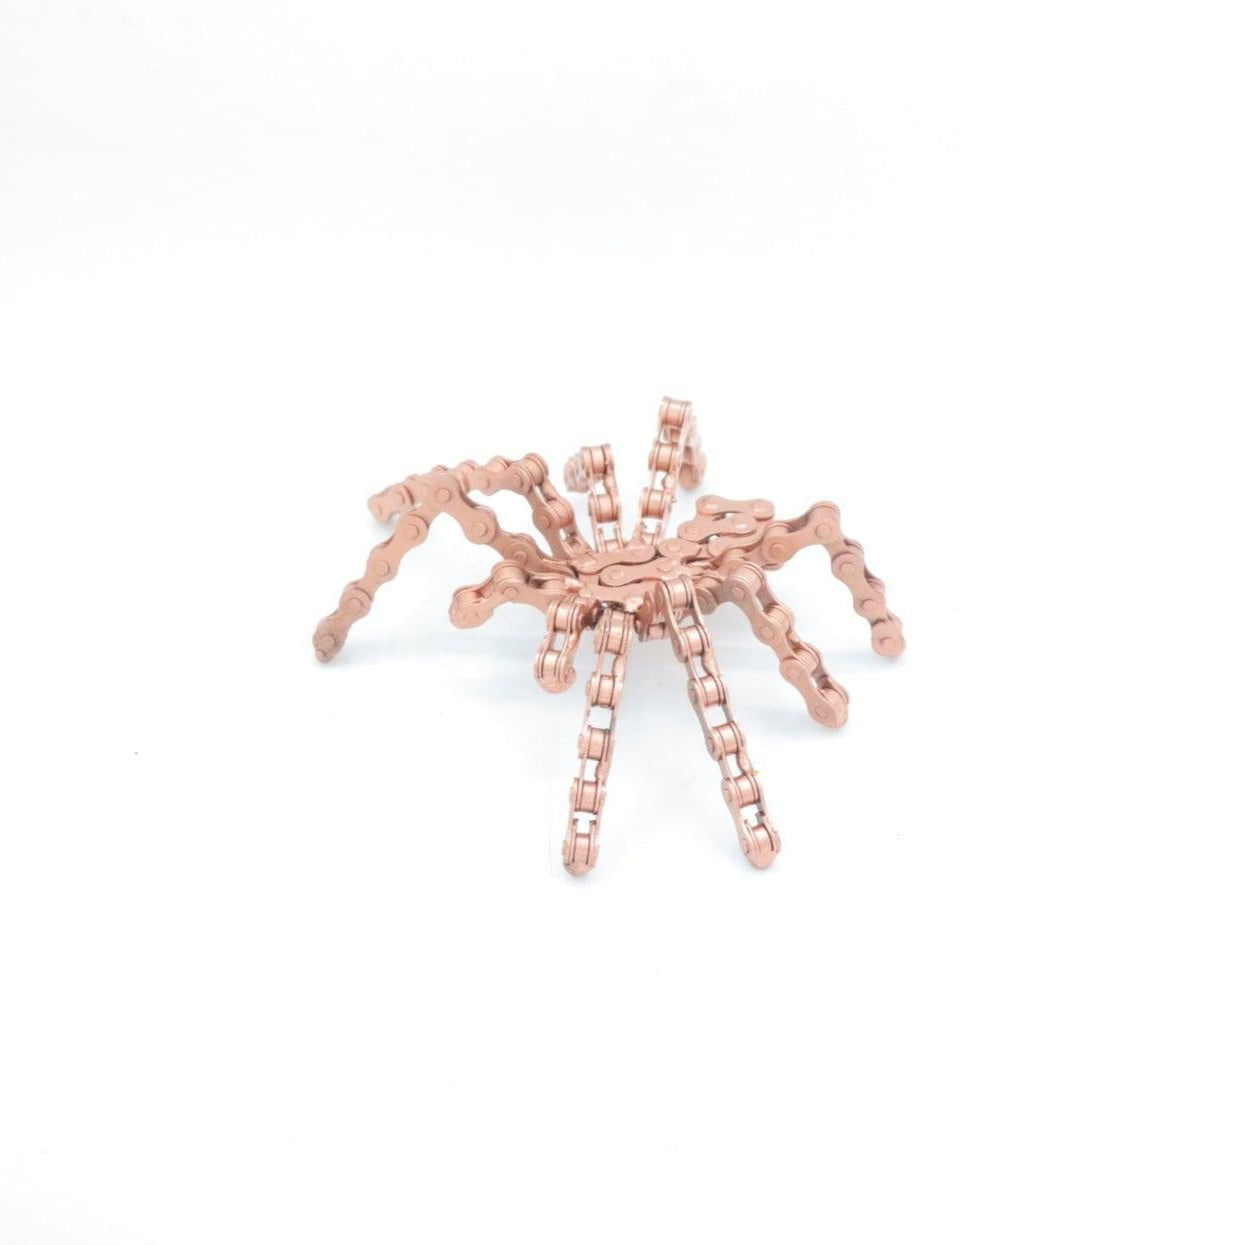 Spider Sculpture | UNCHAINED by NIRIT LEVAV PACKER